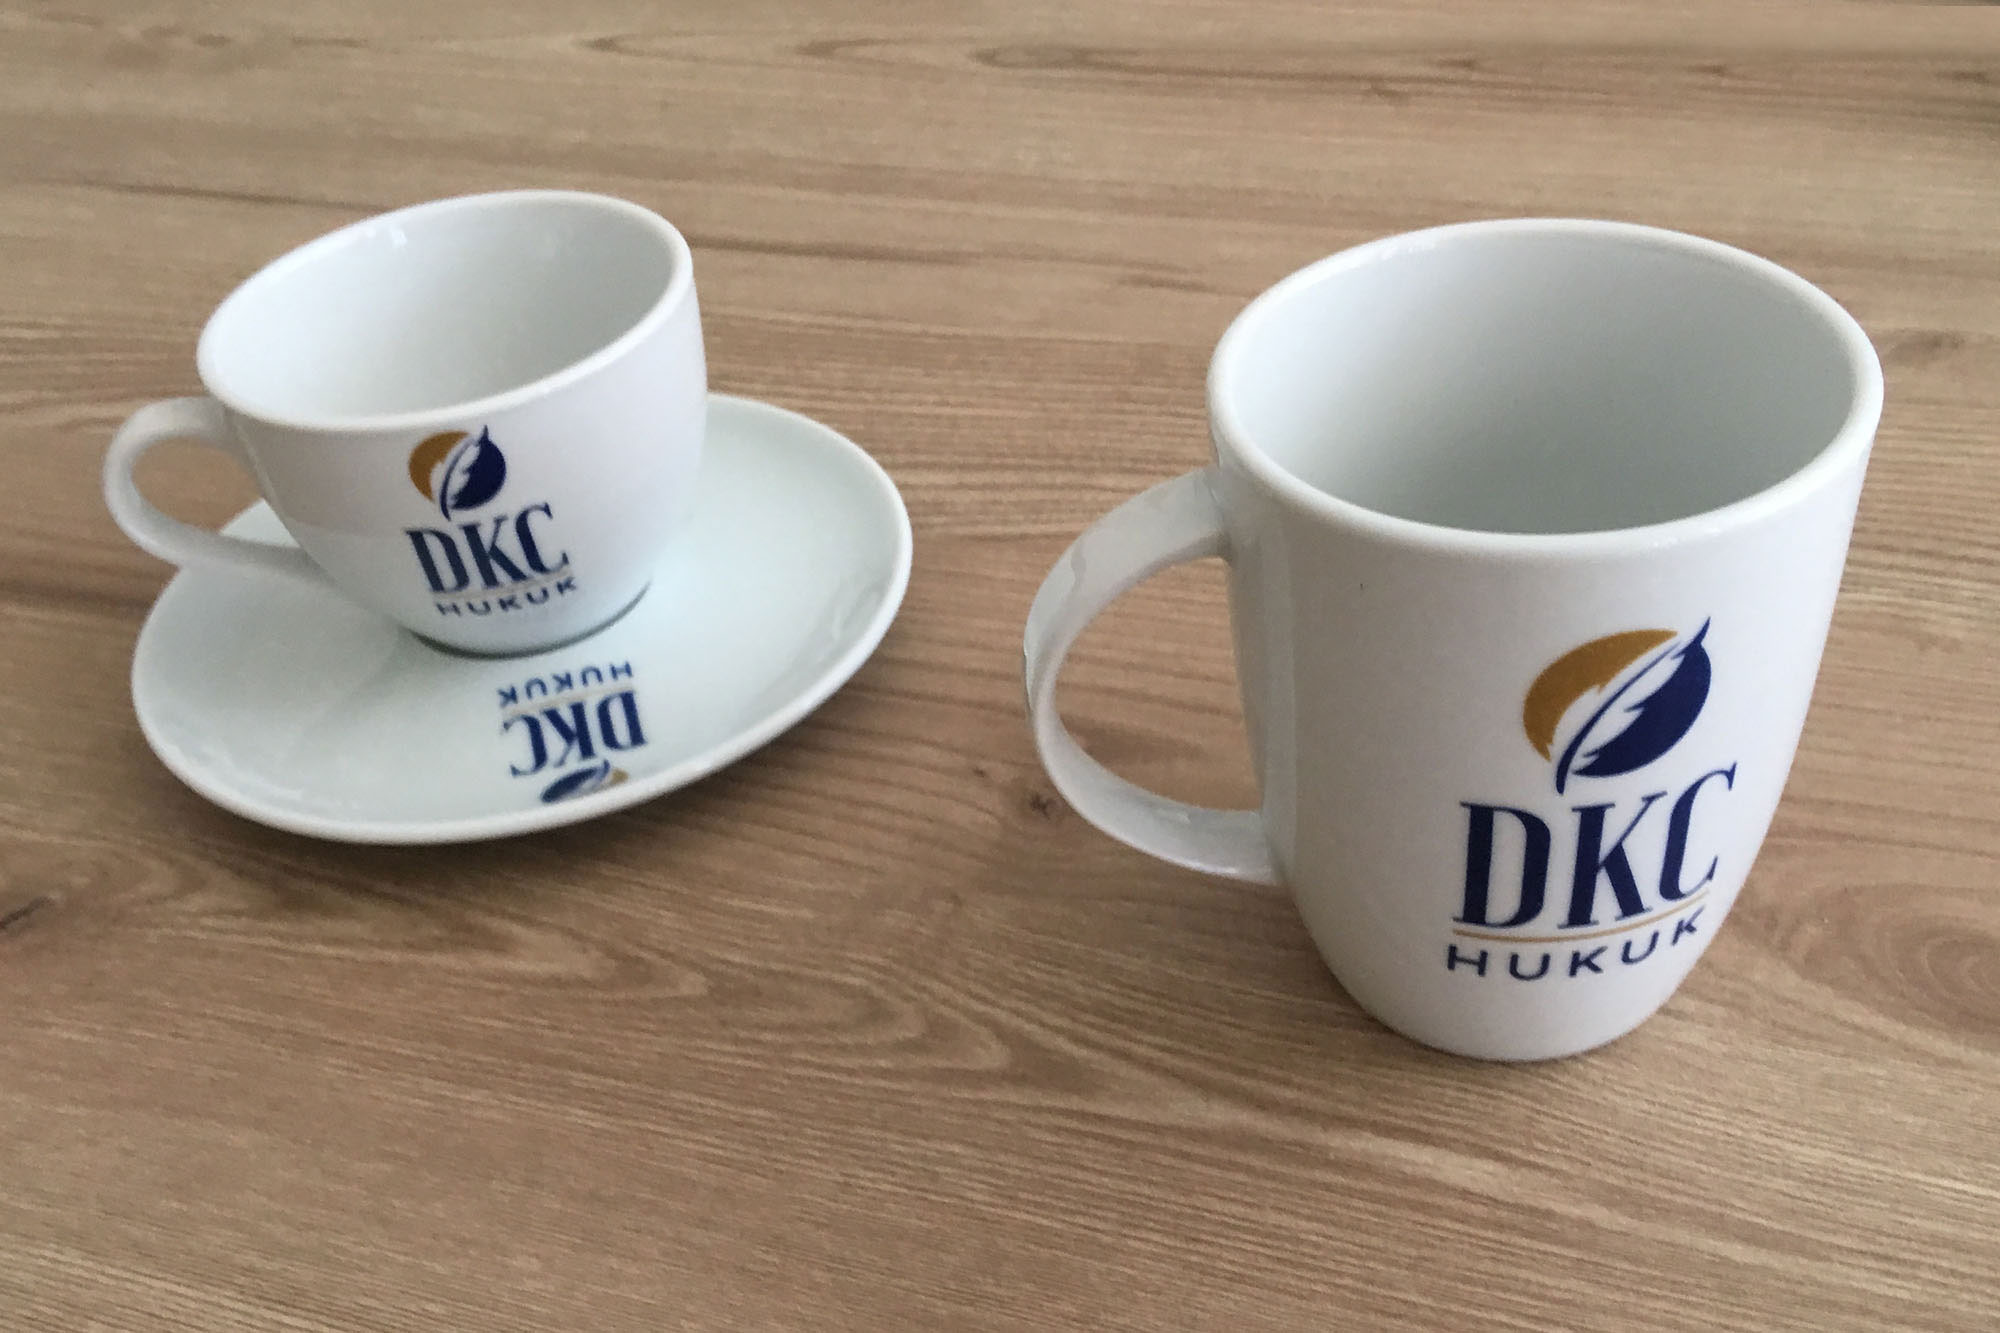 DKC Law Office Promotion Mug Glass Cup